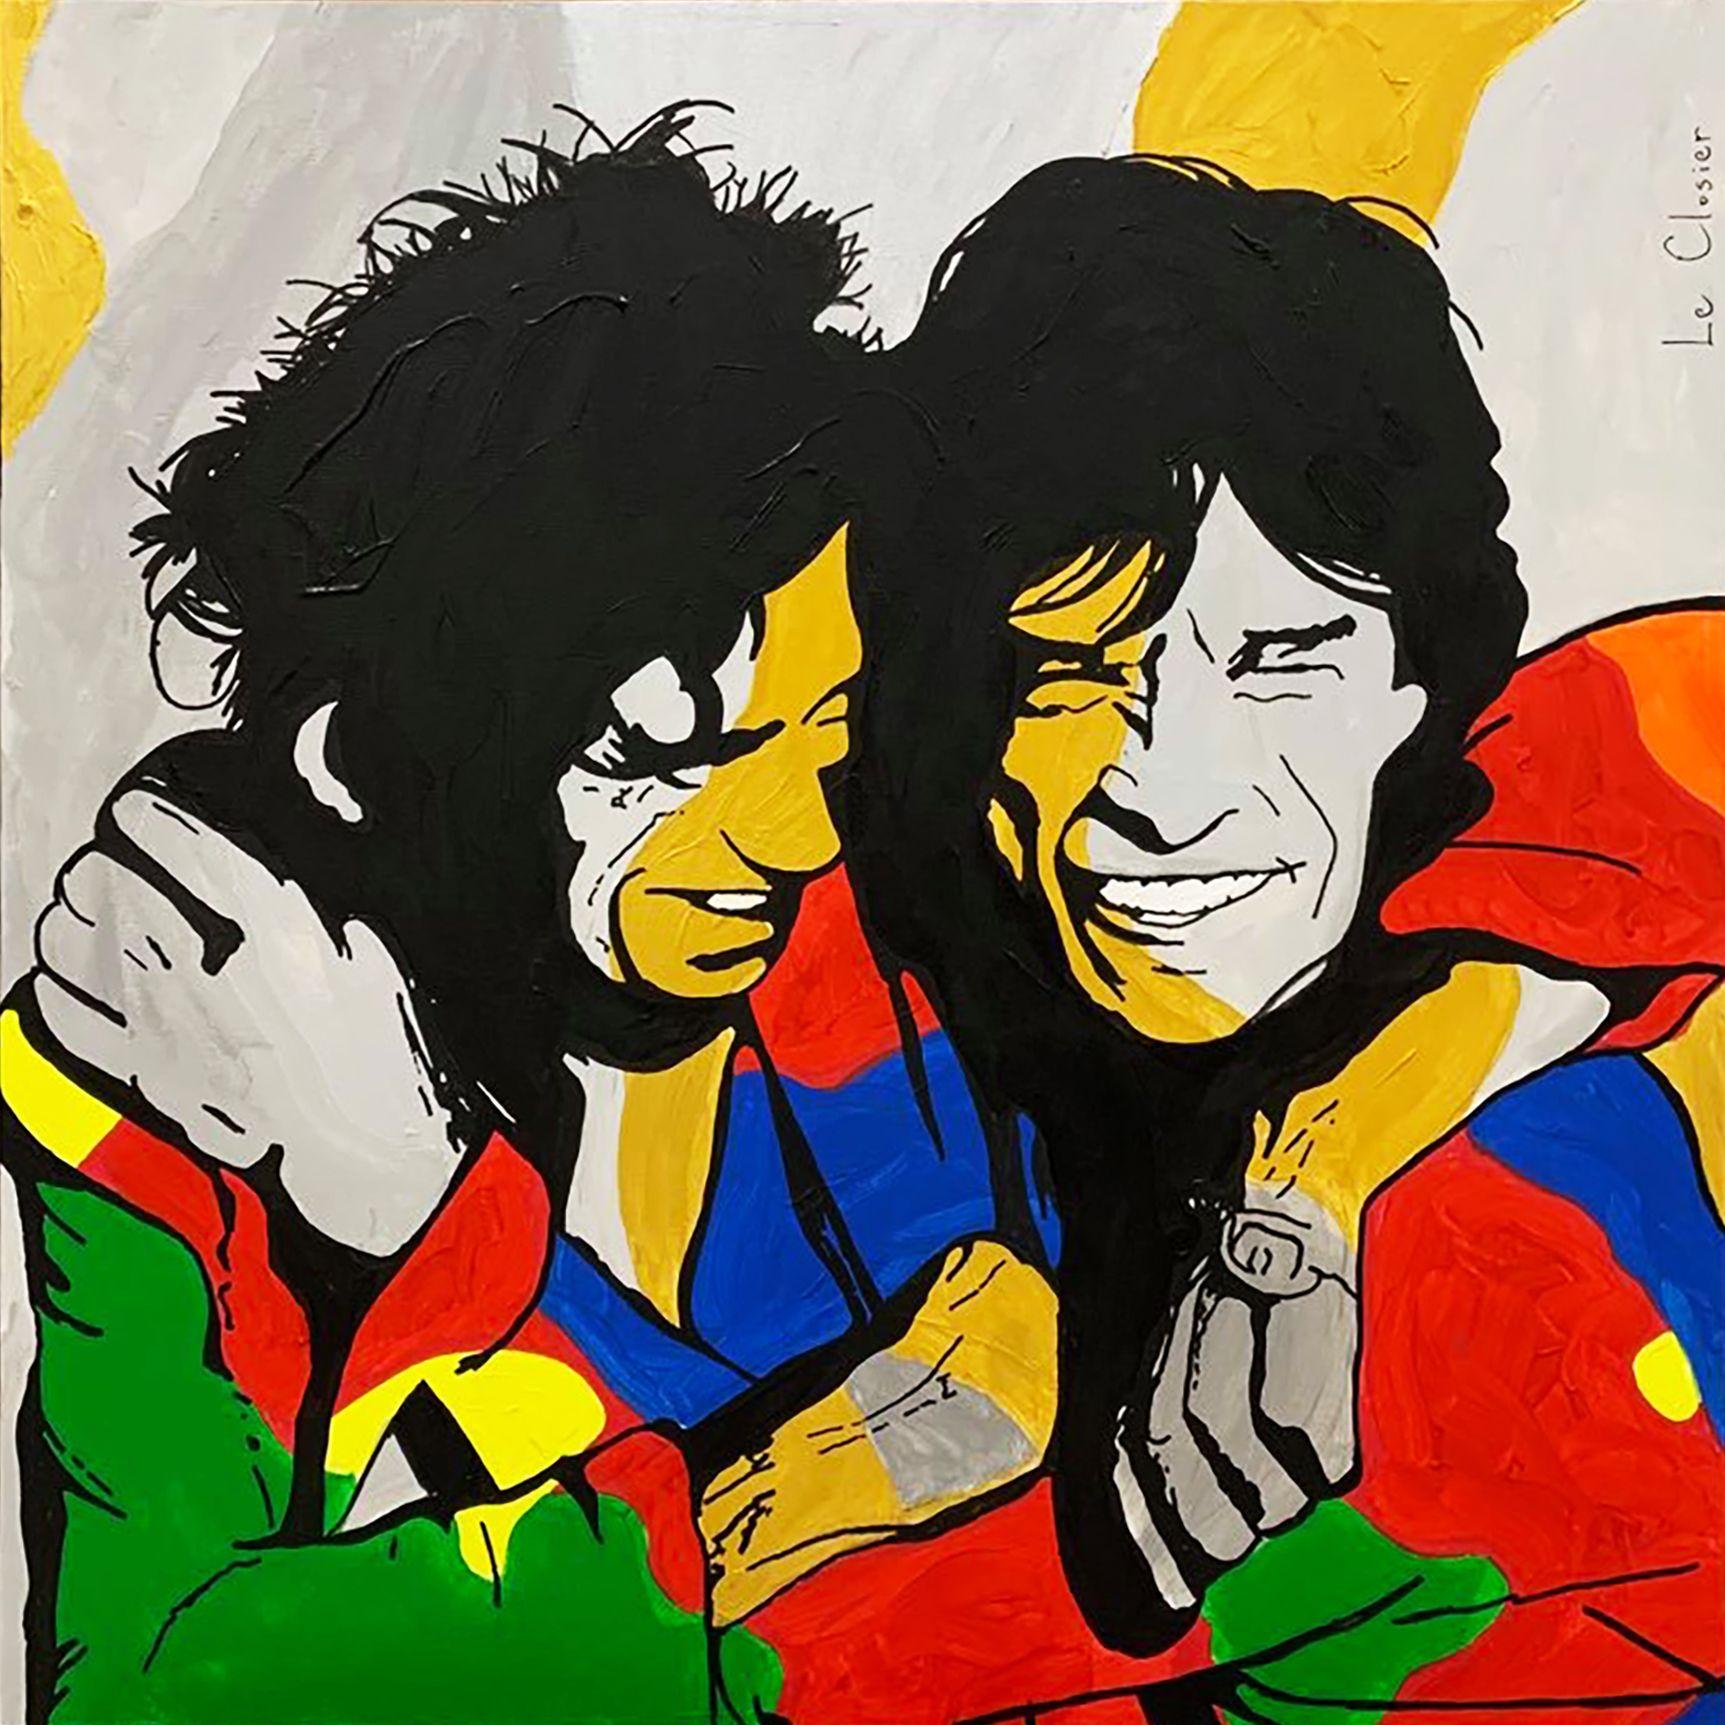 MICK & KEITH.  Mick Jagger and Keith Richards, singer and lead guitarist of the ROLLING STONES.  Original painting.  Acrylic, spray paint and golden oil on canvas.  30in x 30in (76cm x 76cm).  Ready to hang. :: Painting :: Pop-Art :: This piece